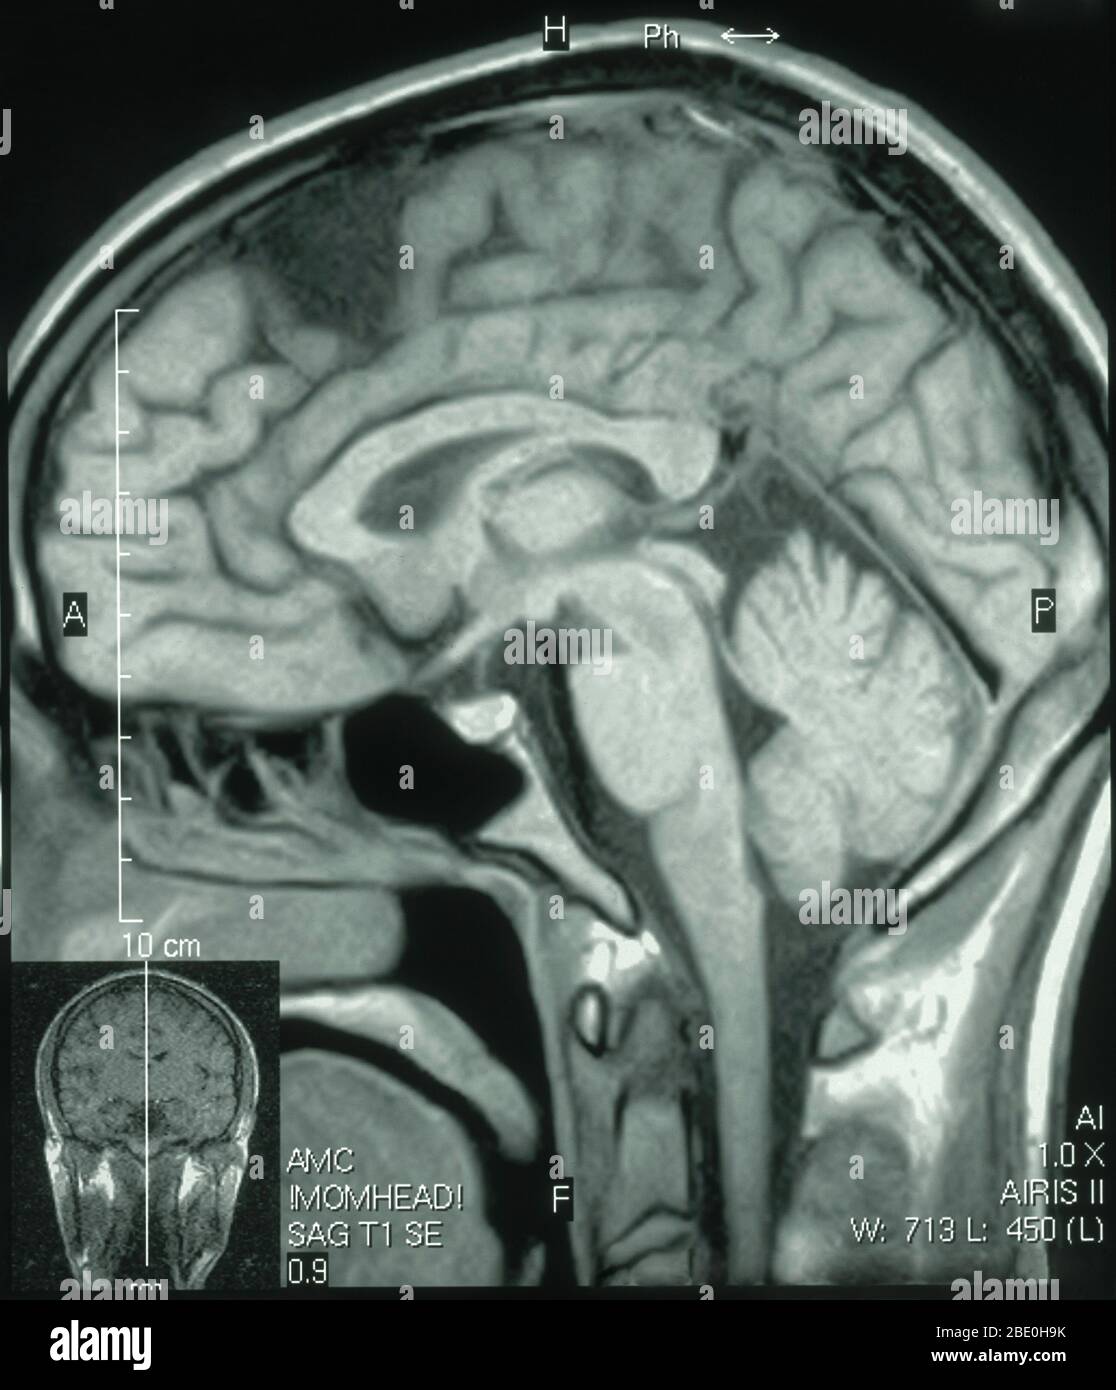 MRI of the brain (sagittal view) of a 26 year old male. The MRI was taken as a result of head injury in a car accident. Diagnosis from the MRI's is a small arachnoid cyst in the parasagittal anterior left frontal region. All other aspects appear normal. Stock Photo